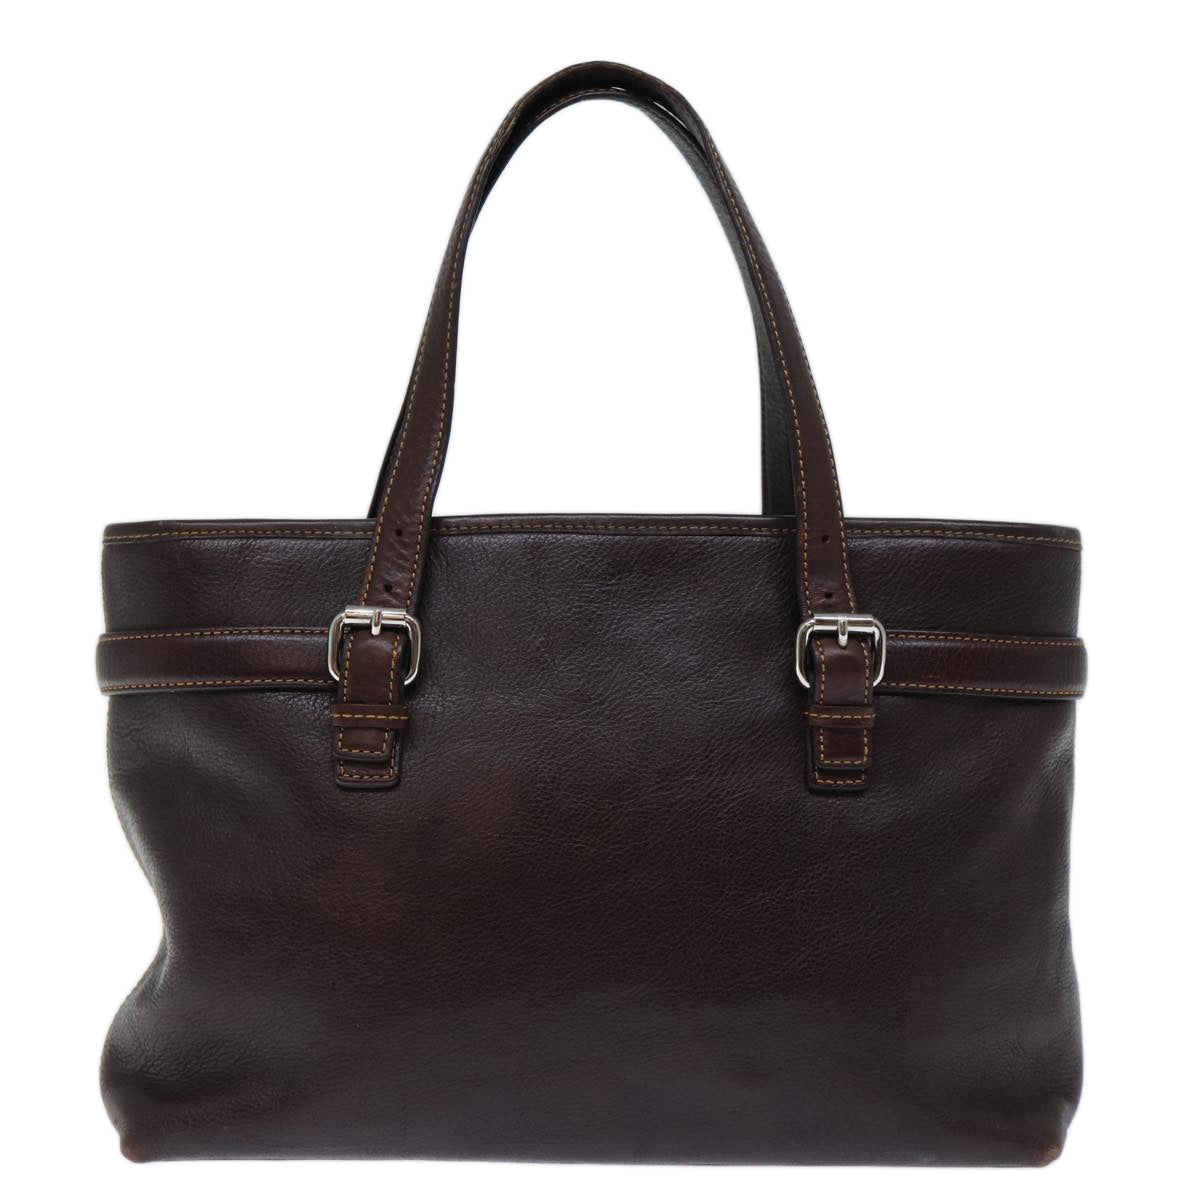 GIVENCHY Hand Bag Leather Brown Auth bs13871 - 0